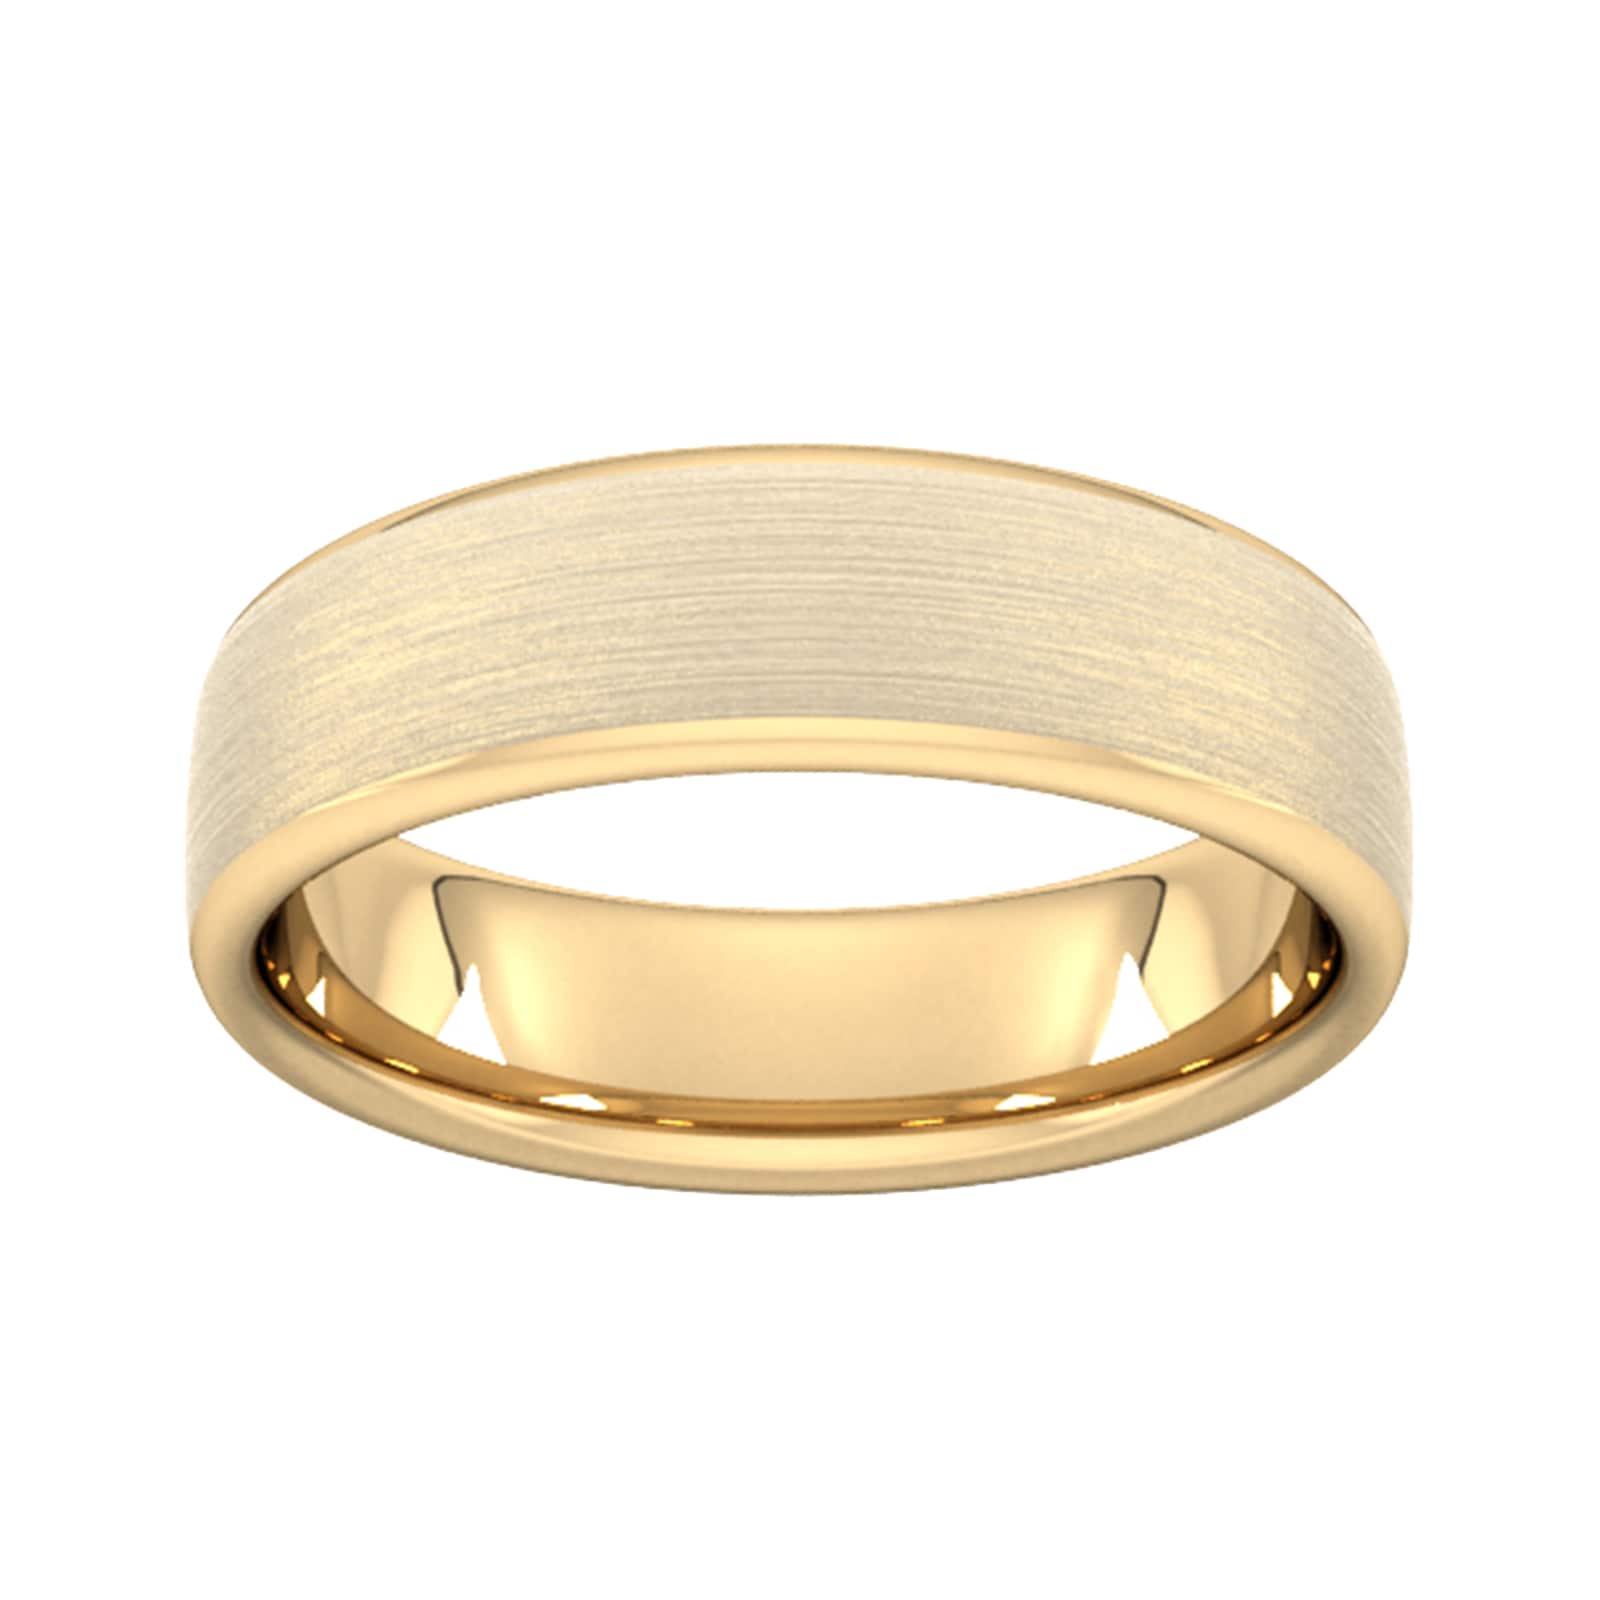 6mm Flat Court Heavy Matt Finished Wedding Ring In 9 Carat Yellow Gold - Ring Size L